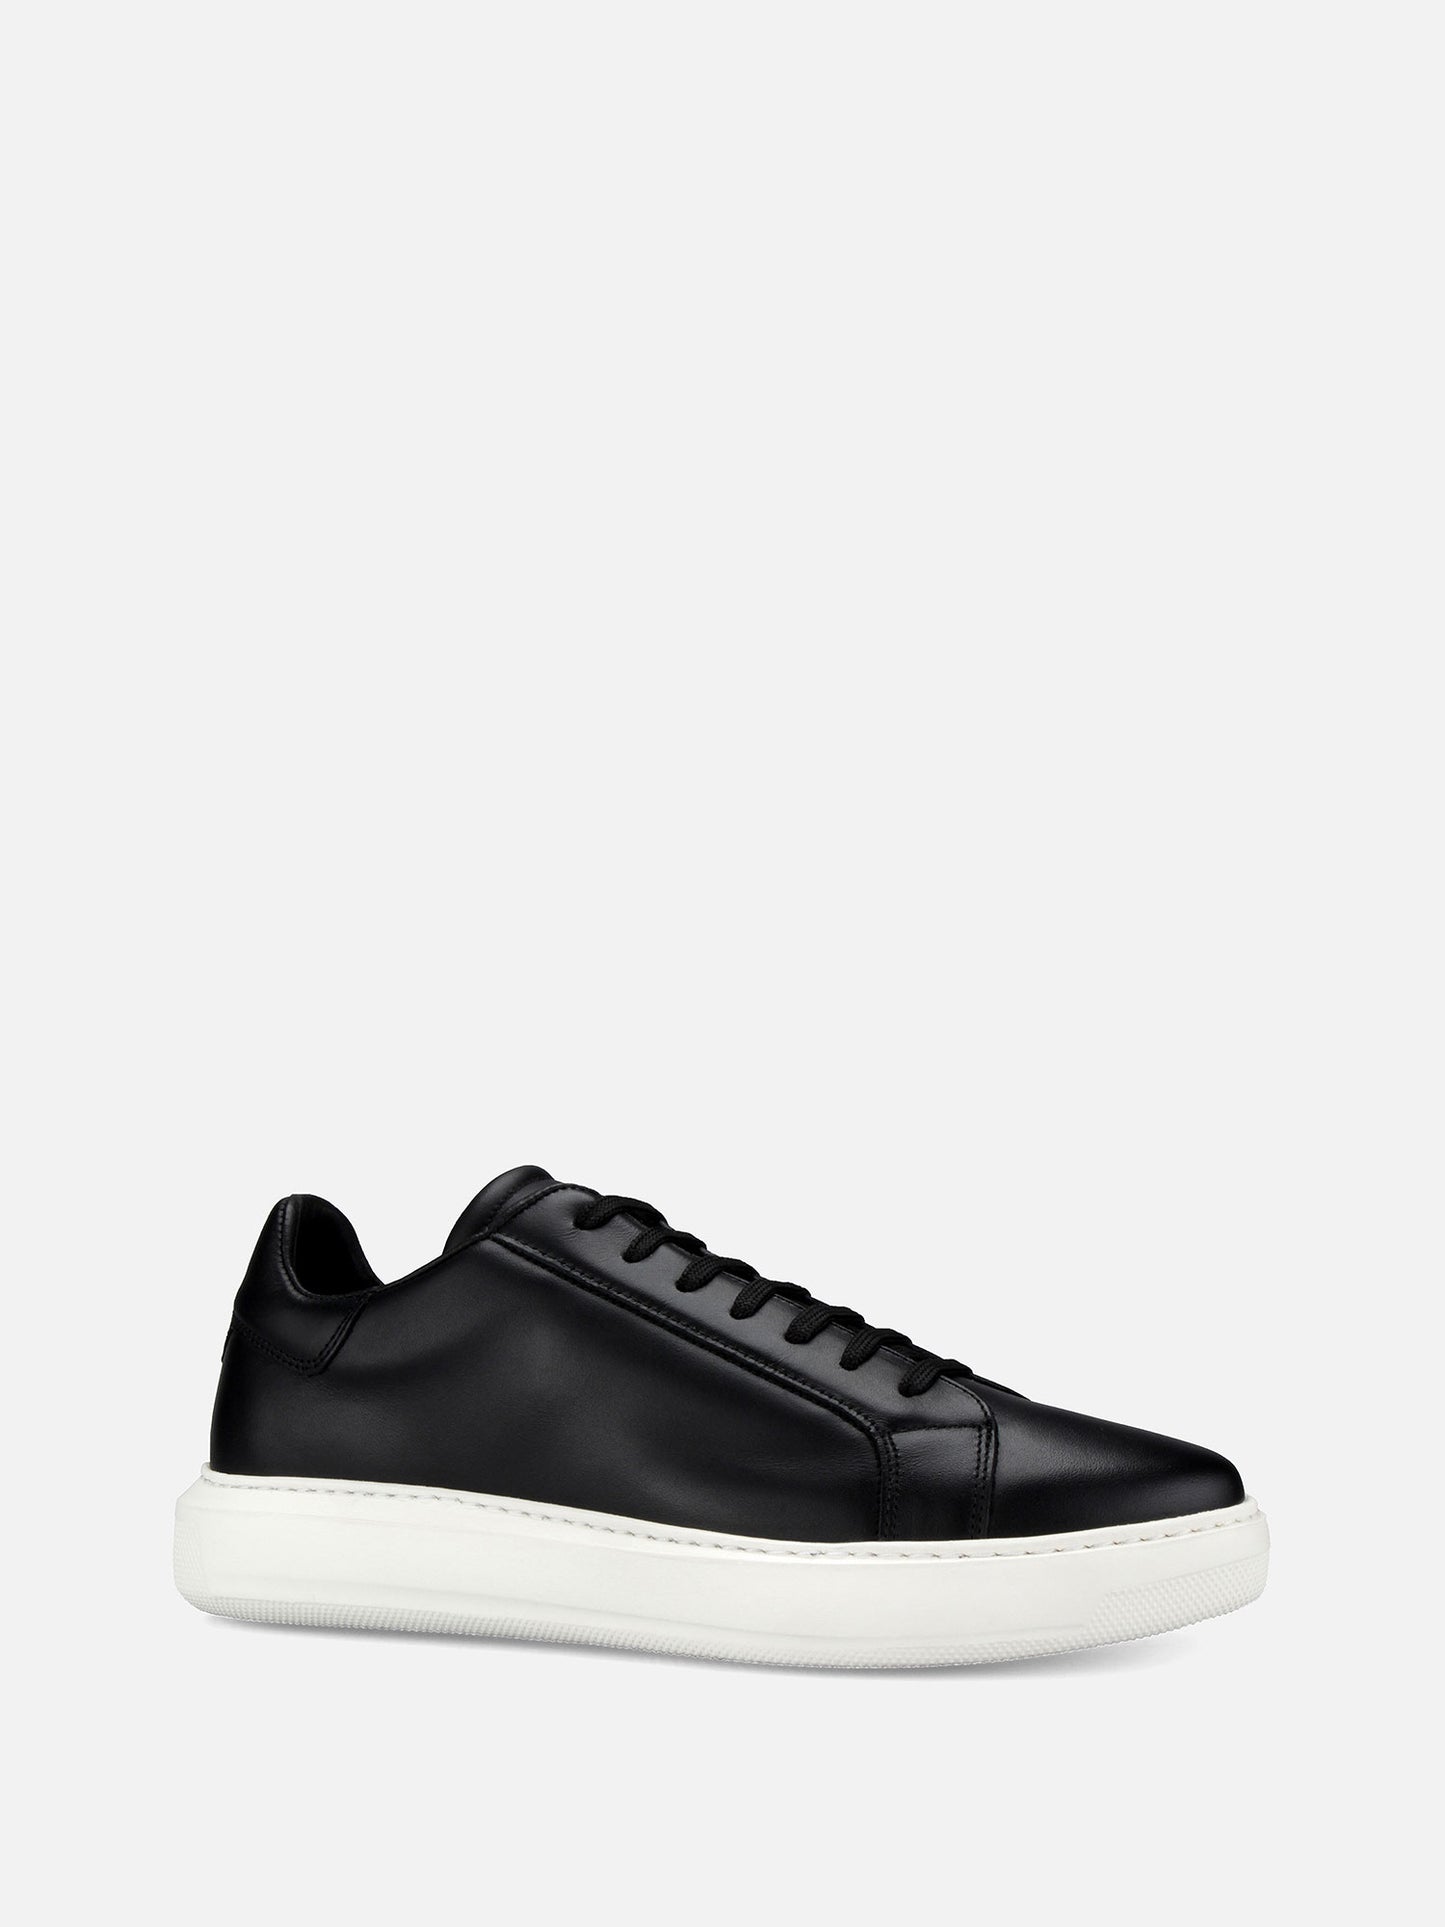 BOT Leather Sneakers - Black